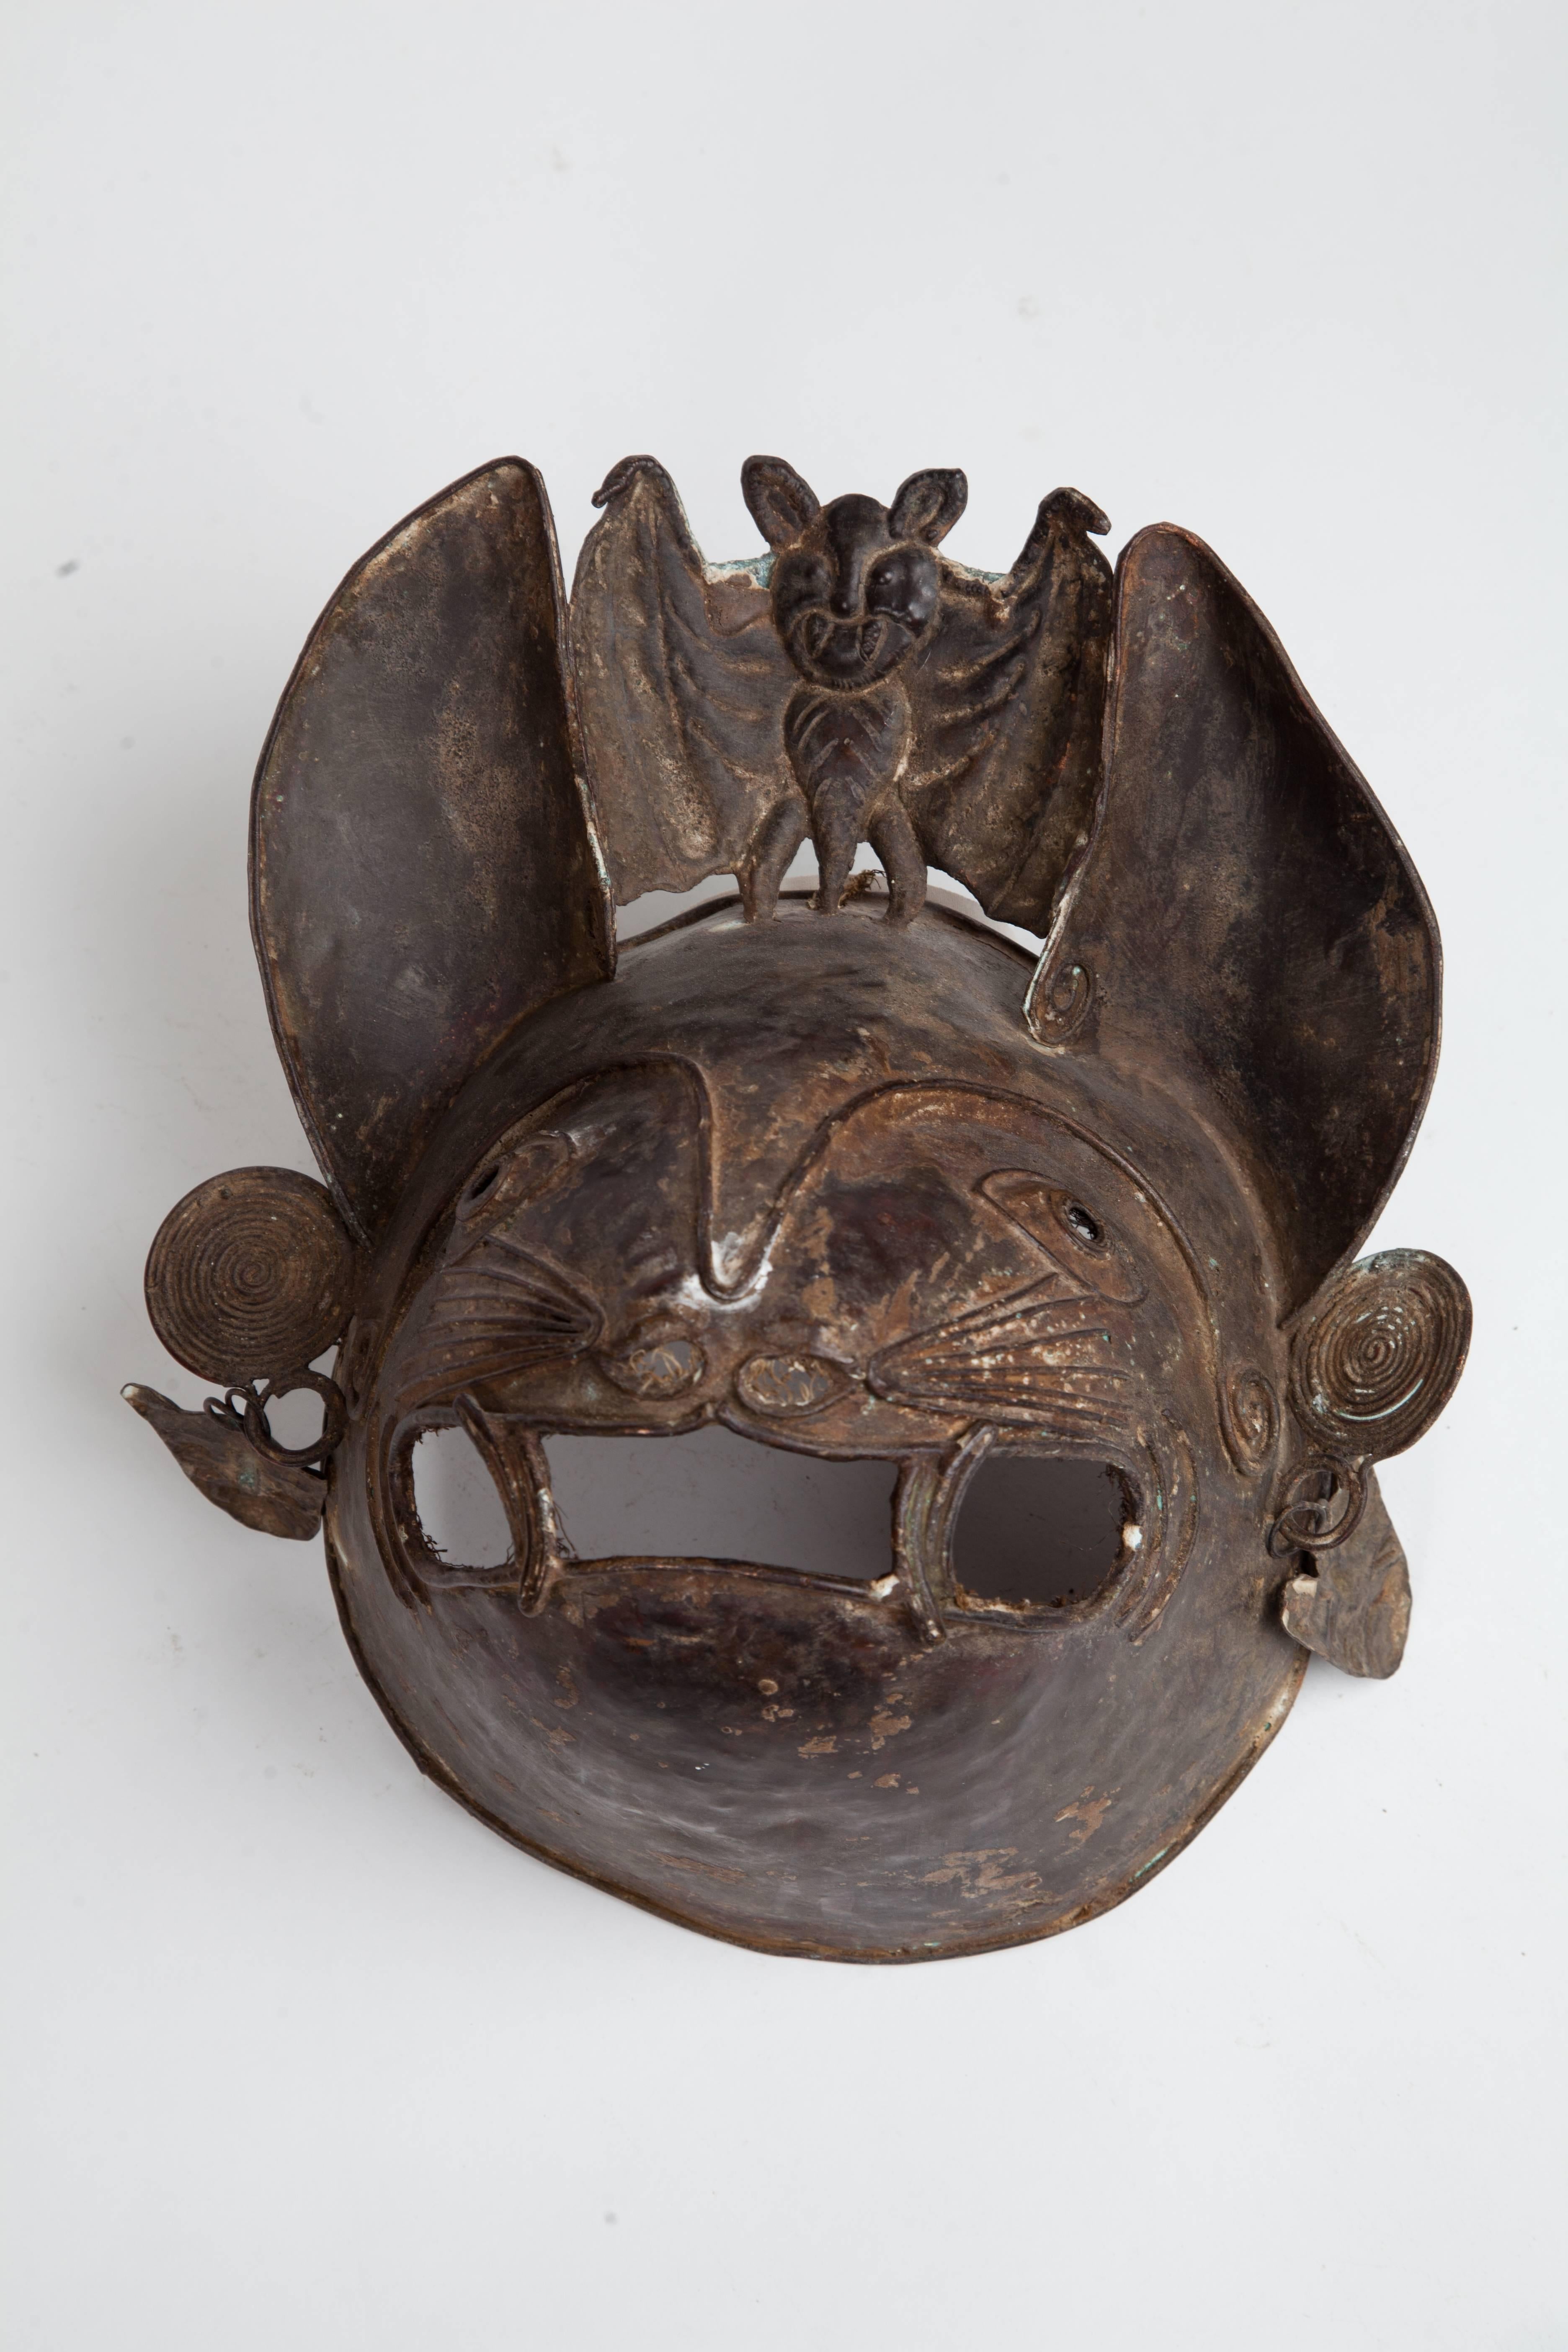 Unusual antique Mexican copper ceremonial dancing mask in the form of a bat.